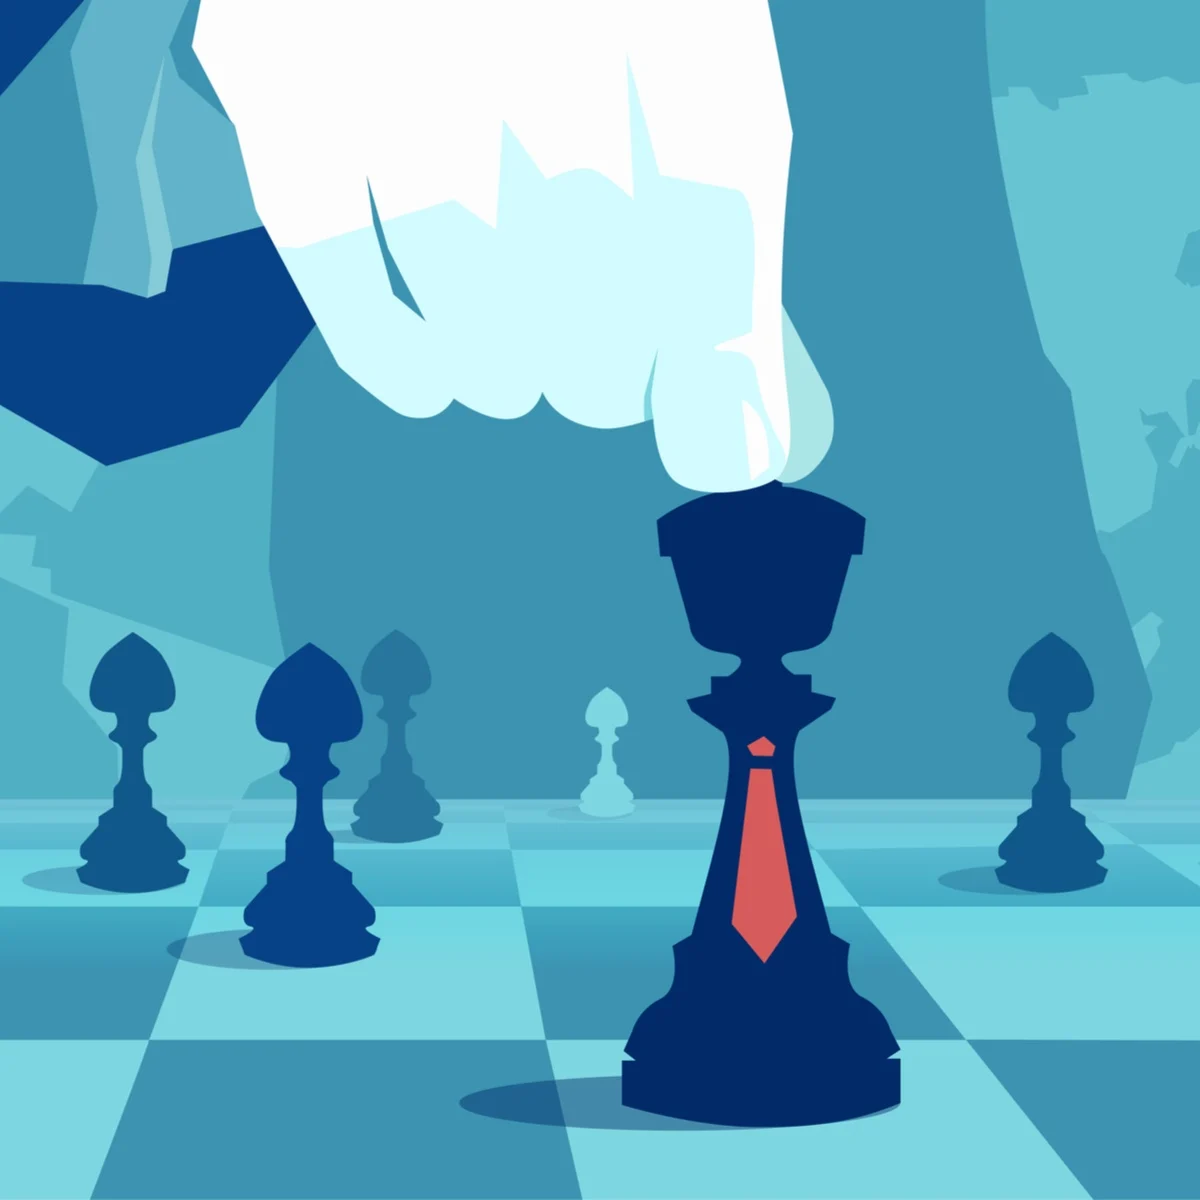 Branding: 5G and the operator game of chess